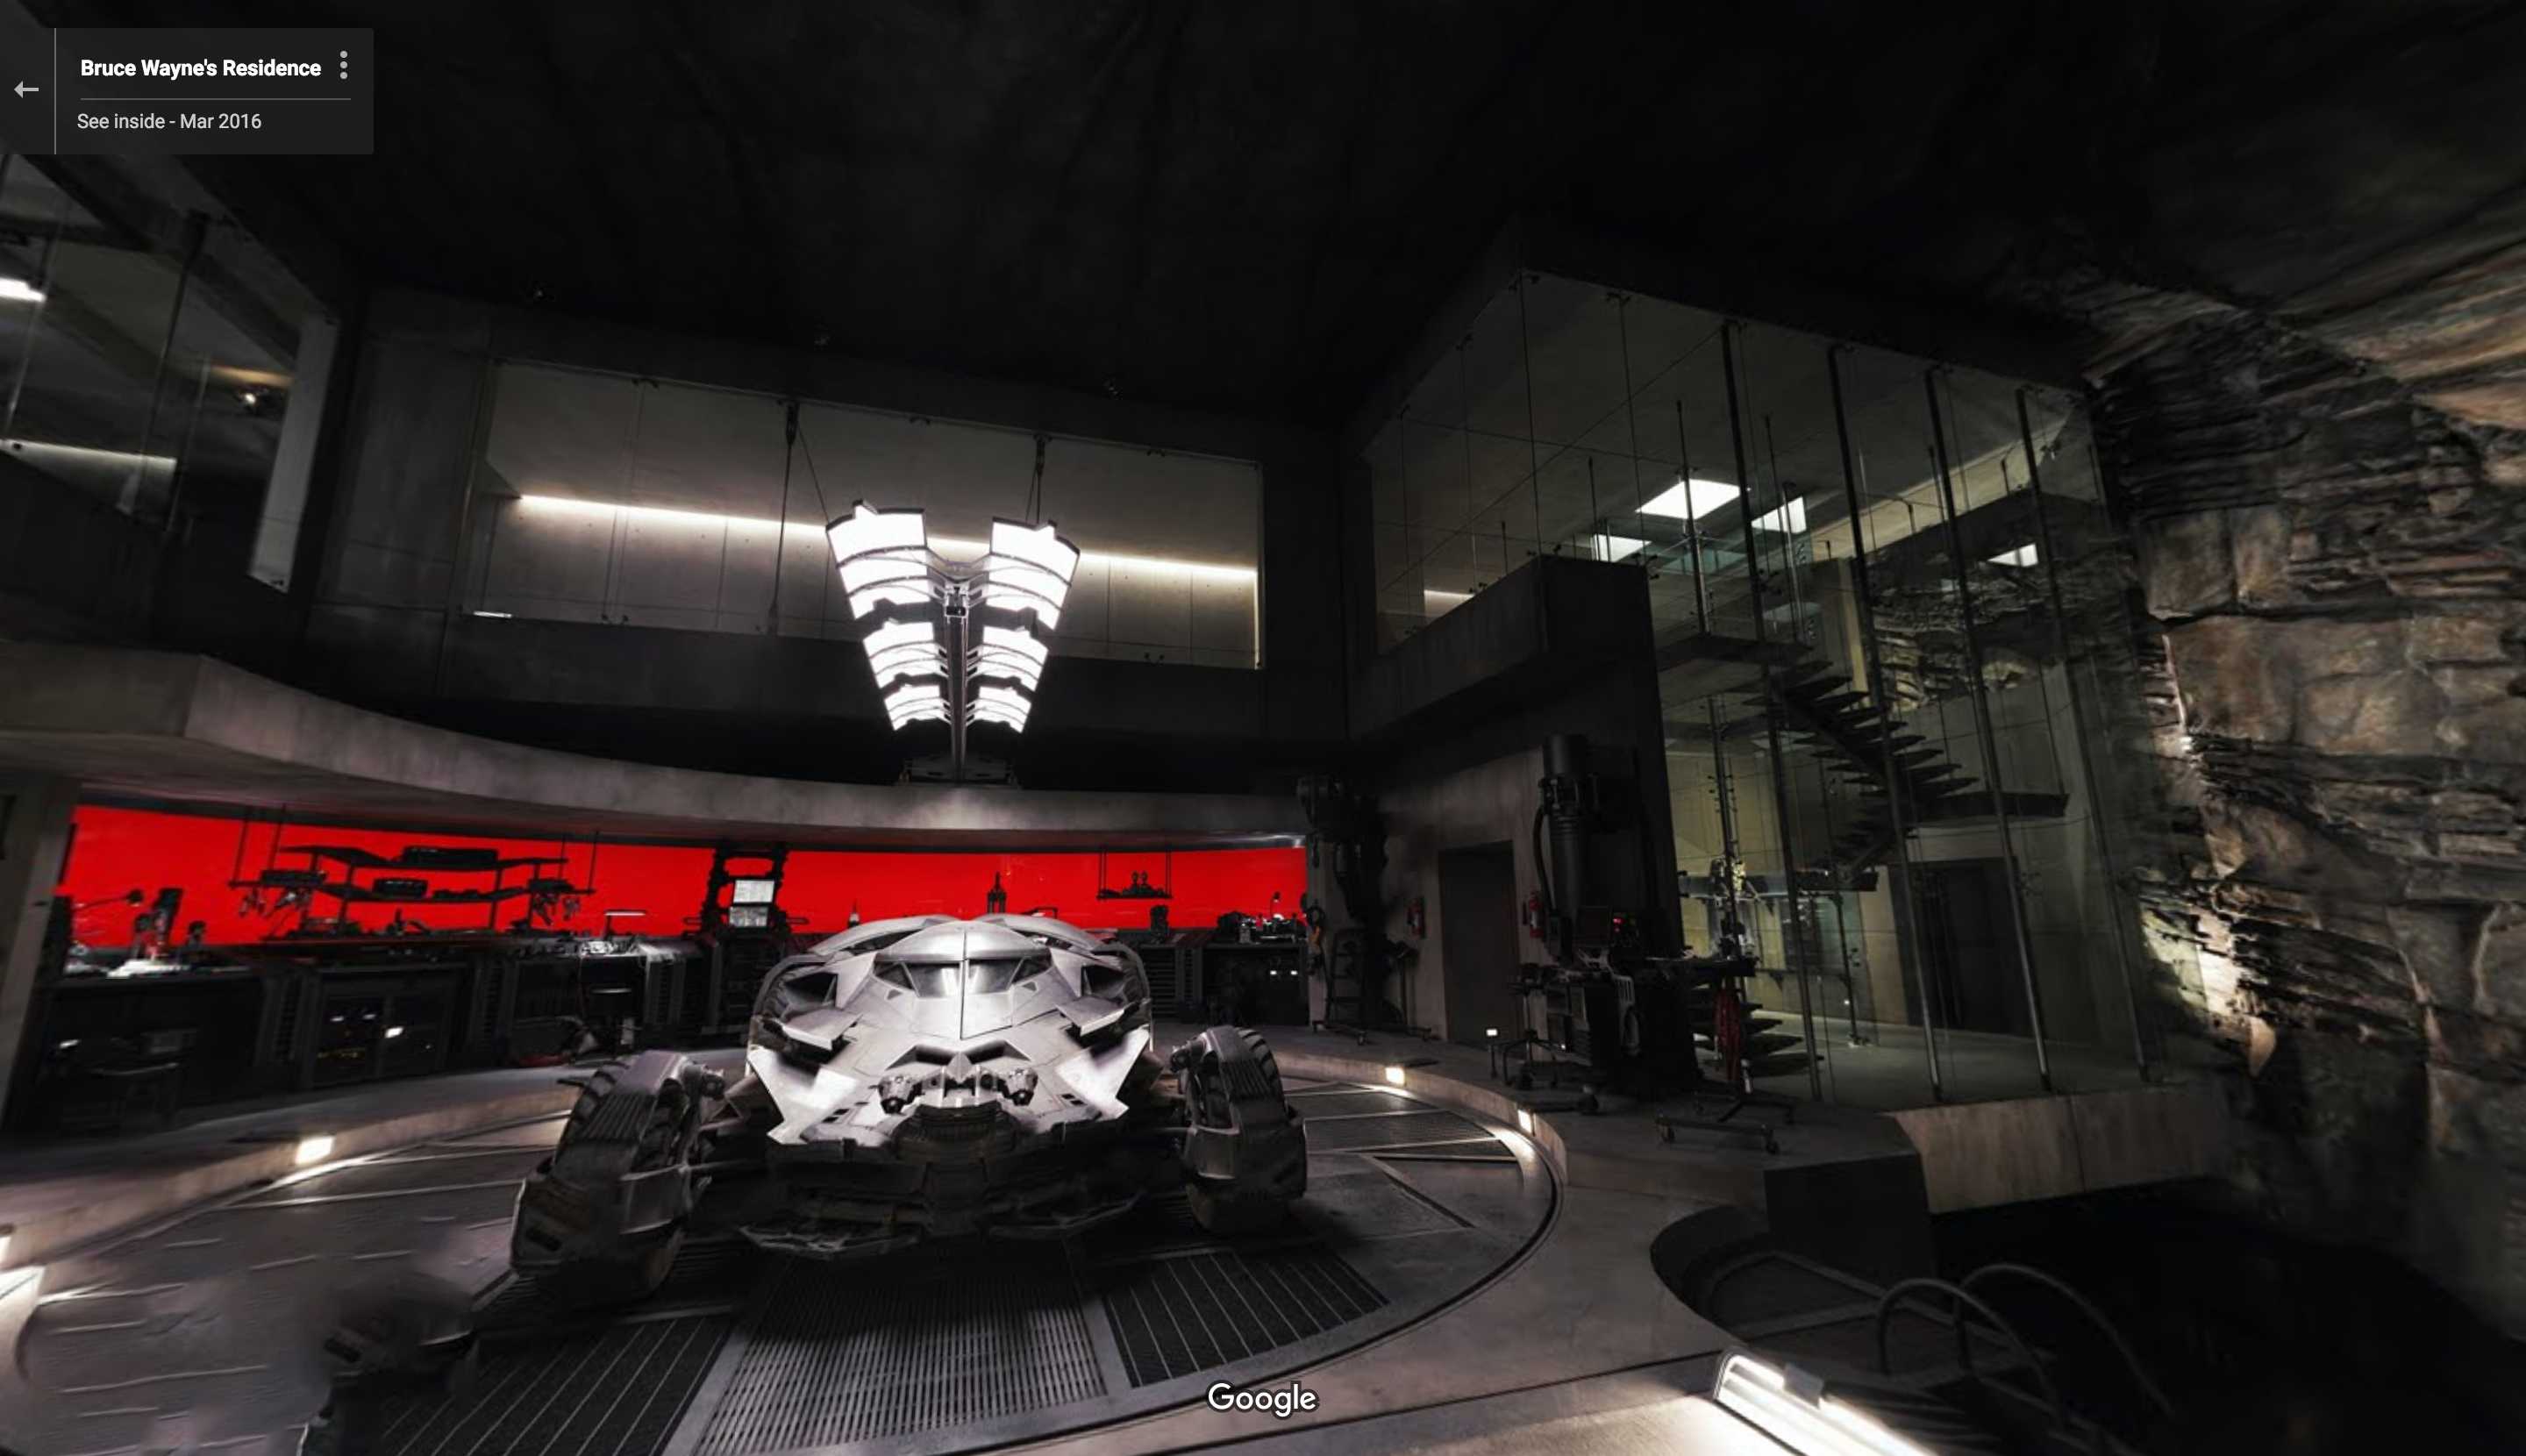 Forget the movie — see the new Batcave from 'Batman v Superman' in Google  Maps